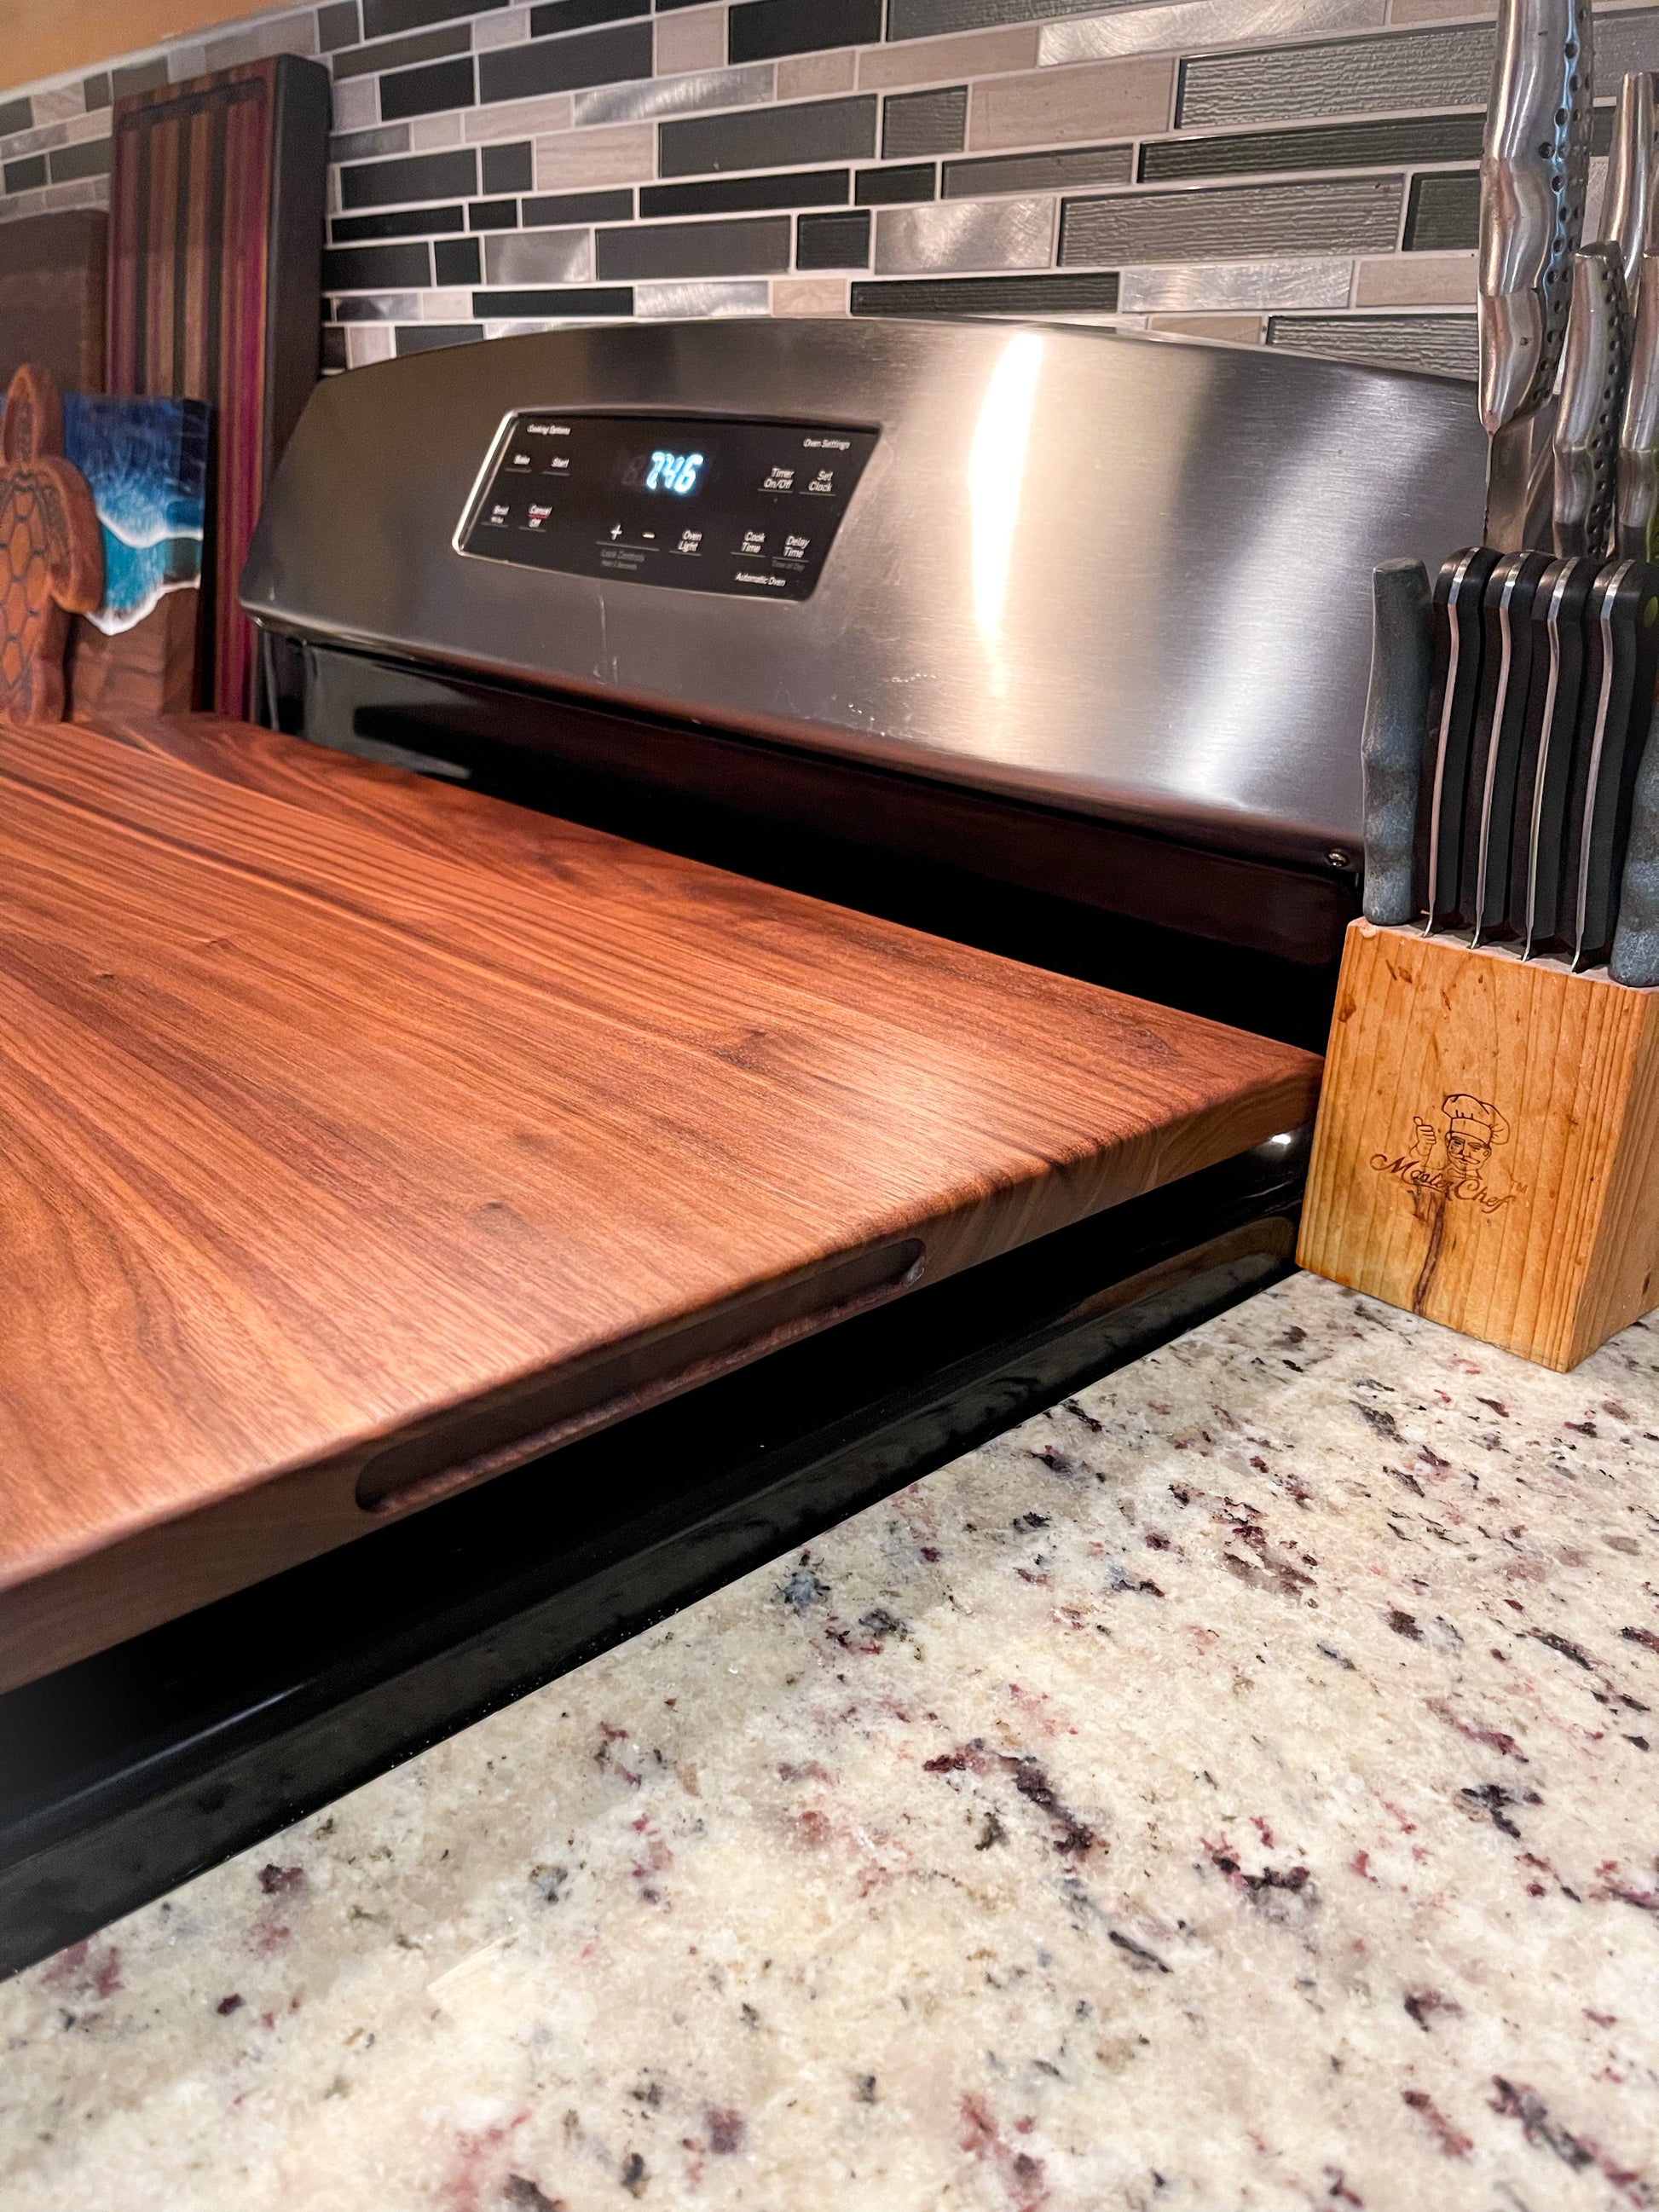 Are Noodle Boards or Cooktop Covers Safe?